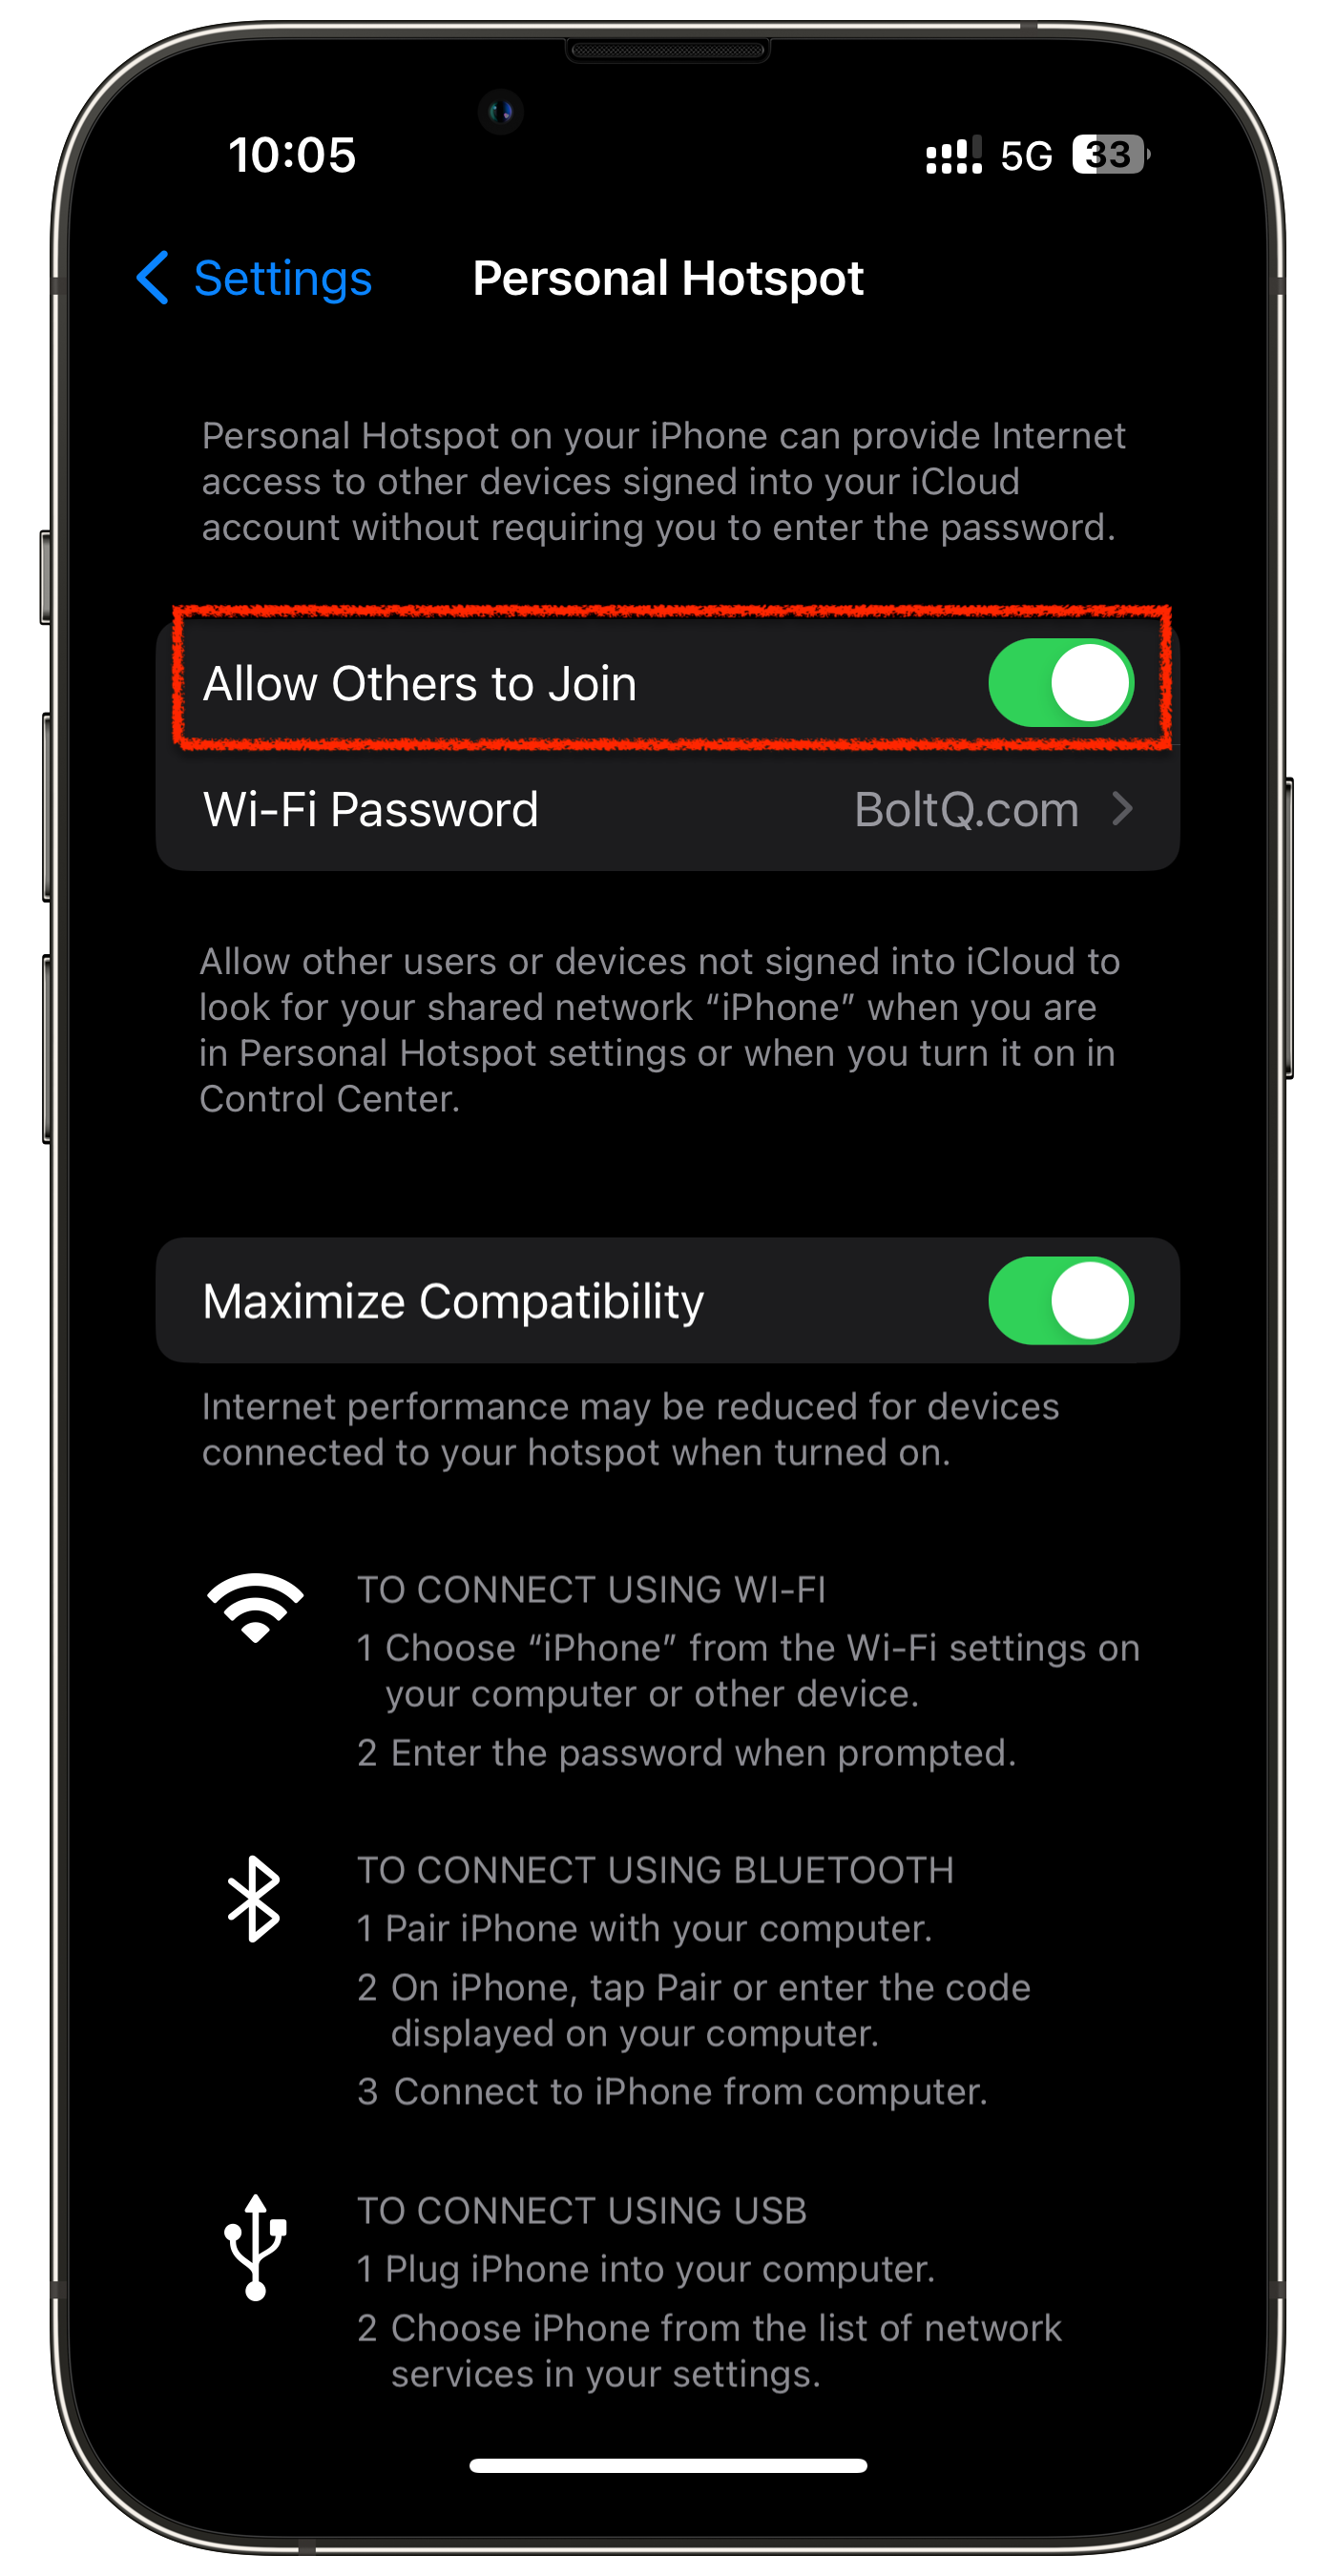 Enable Personal Hotspot and Allow Others